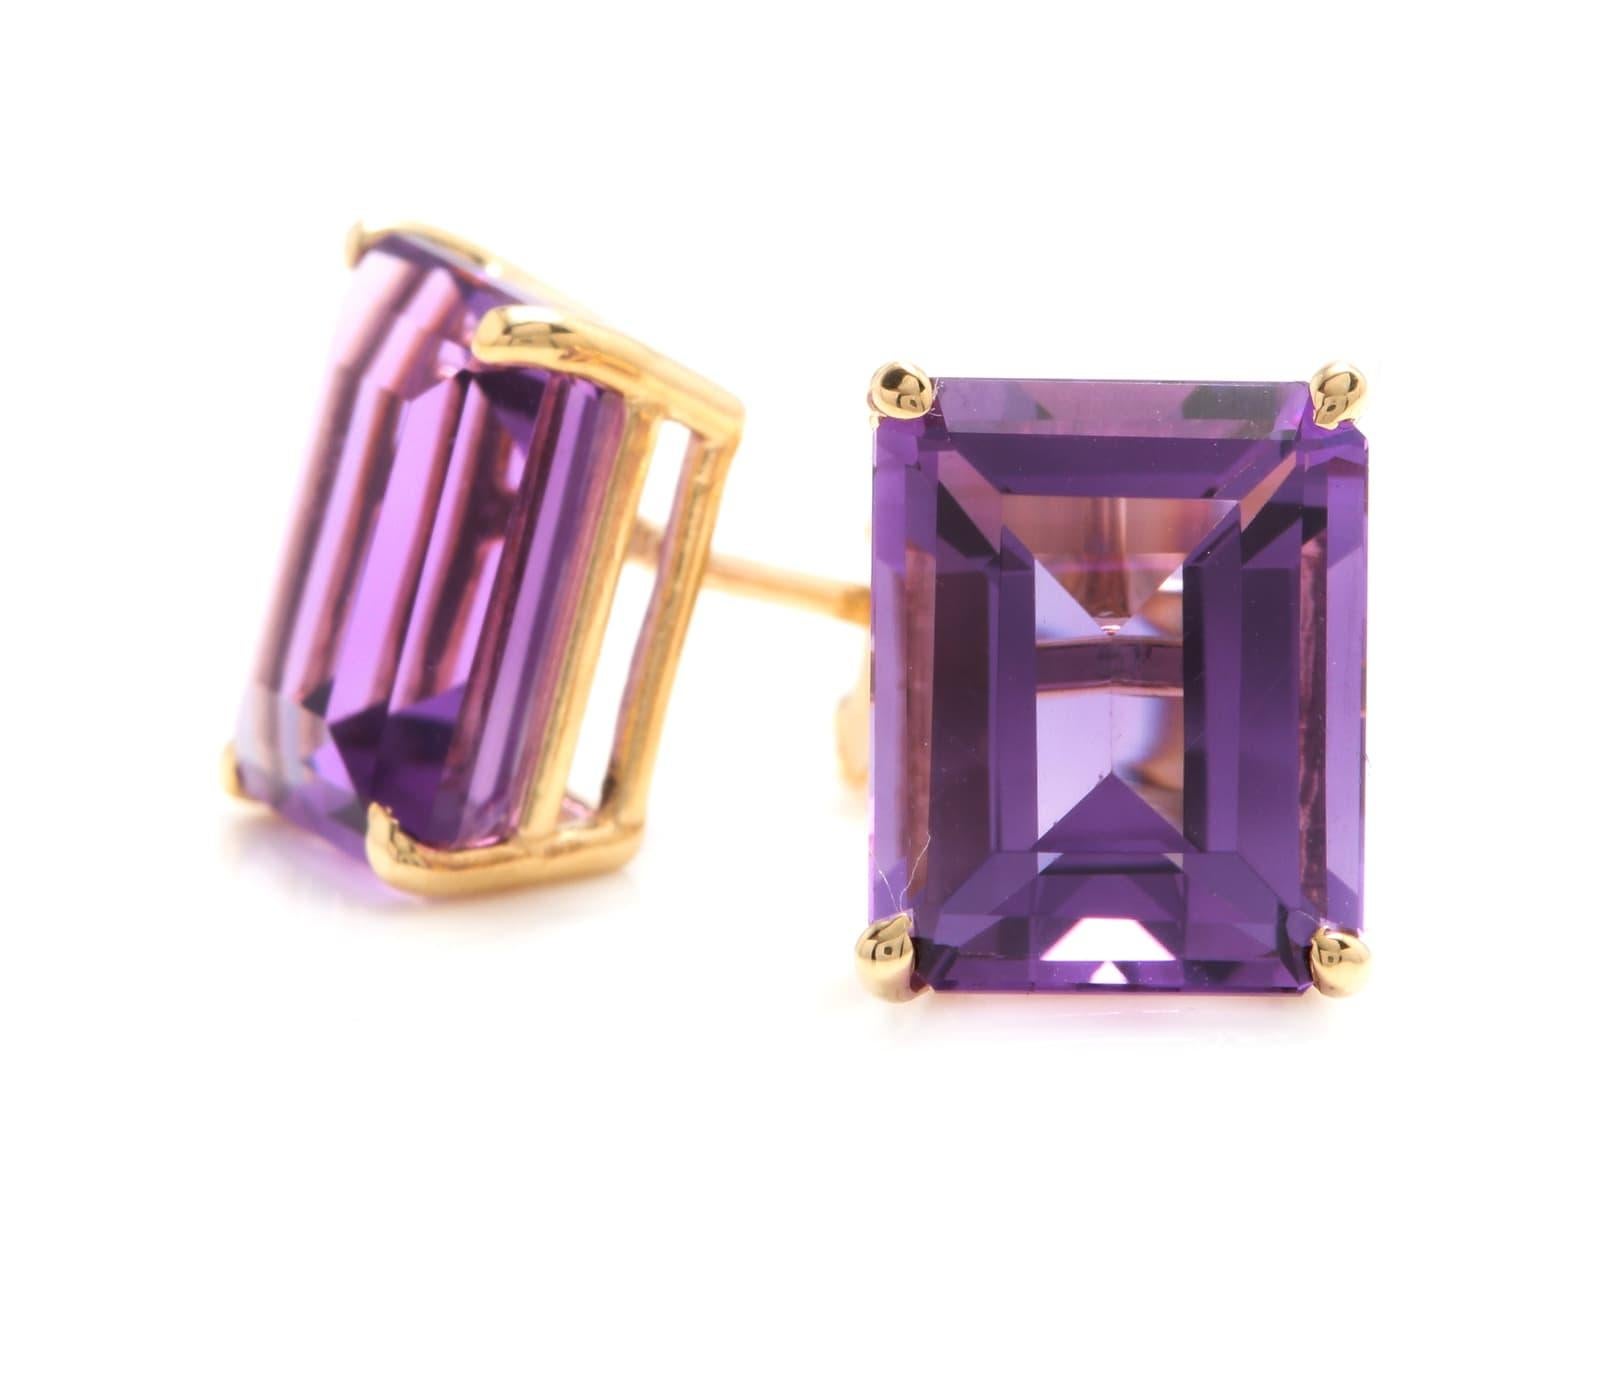 Exquisite Top Quality 6.00 Carats Natural Amethyst 14K Solid Yellow Gold Stud Earrings

Amazing looking piece! 

Total Natural Emerald Cut Amethyst Weight is: 6.00 Carats (both earrings) 

Amethyst Measures: Approx. 9.00 x 7.00mm

Total Earrings